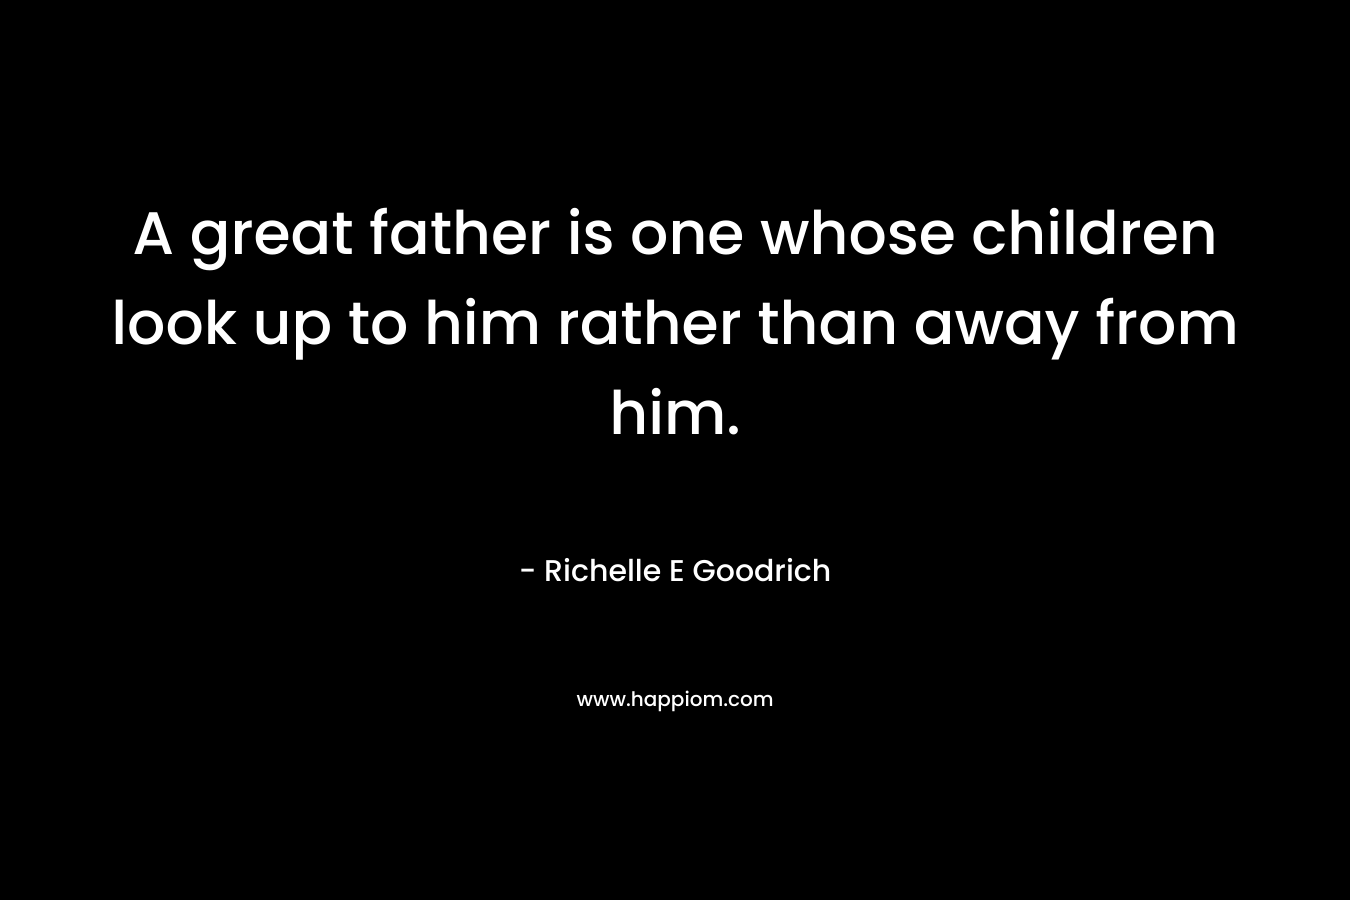 A great father is one whose children look up to him rather than away from him.